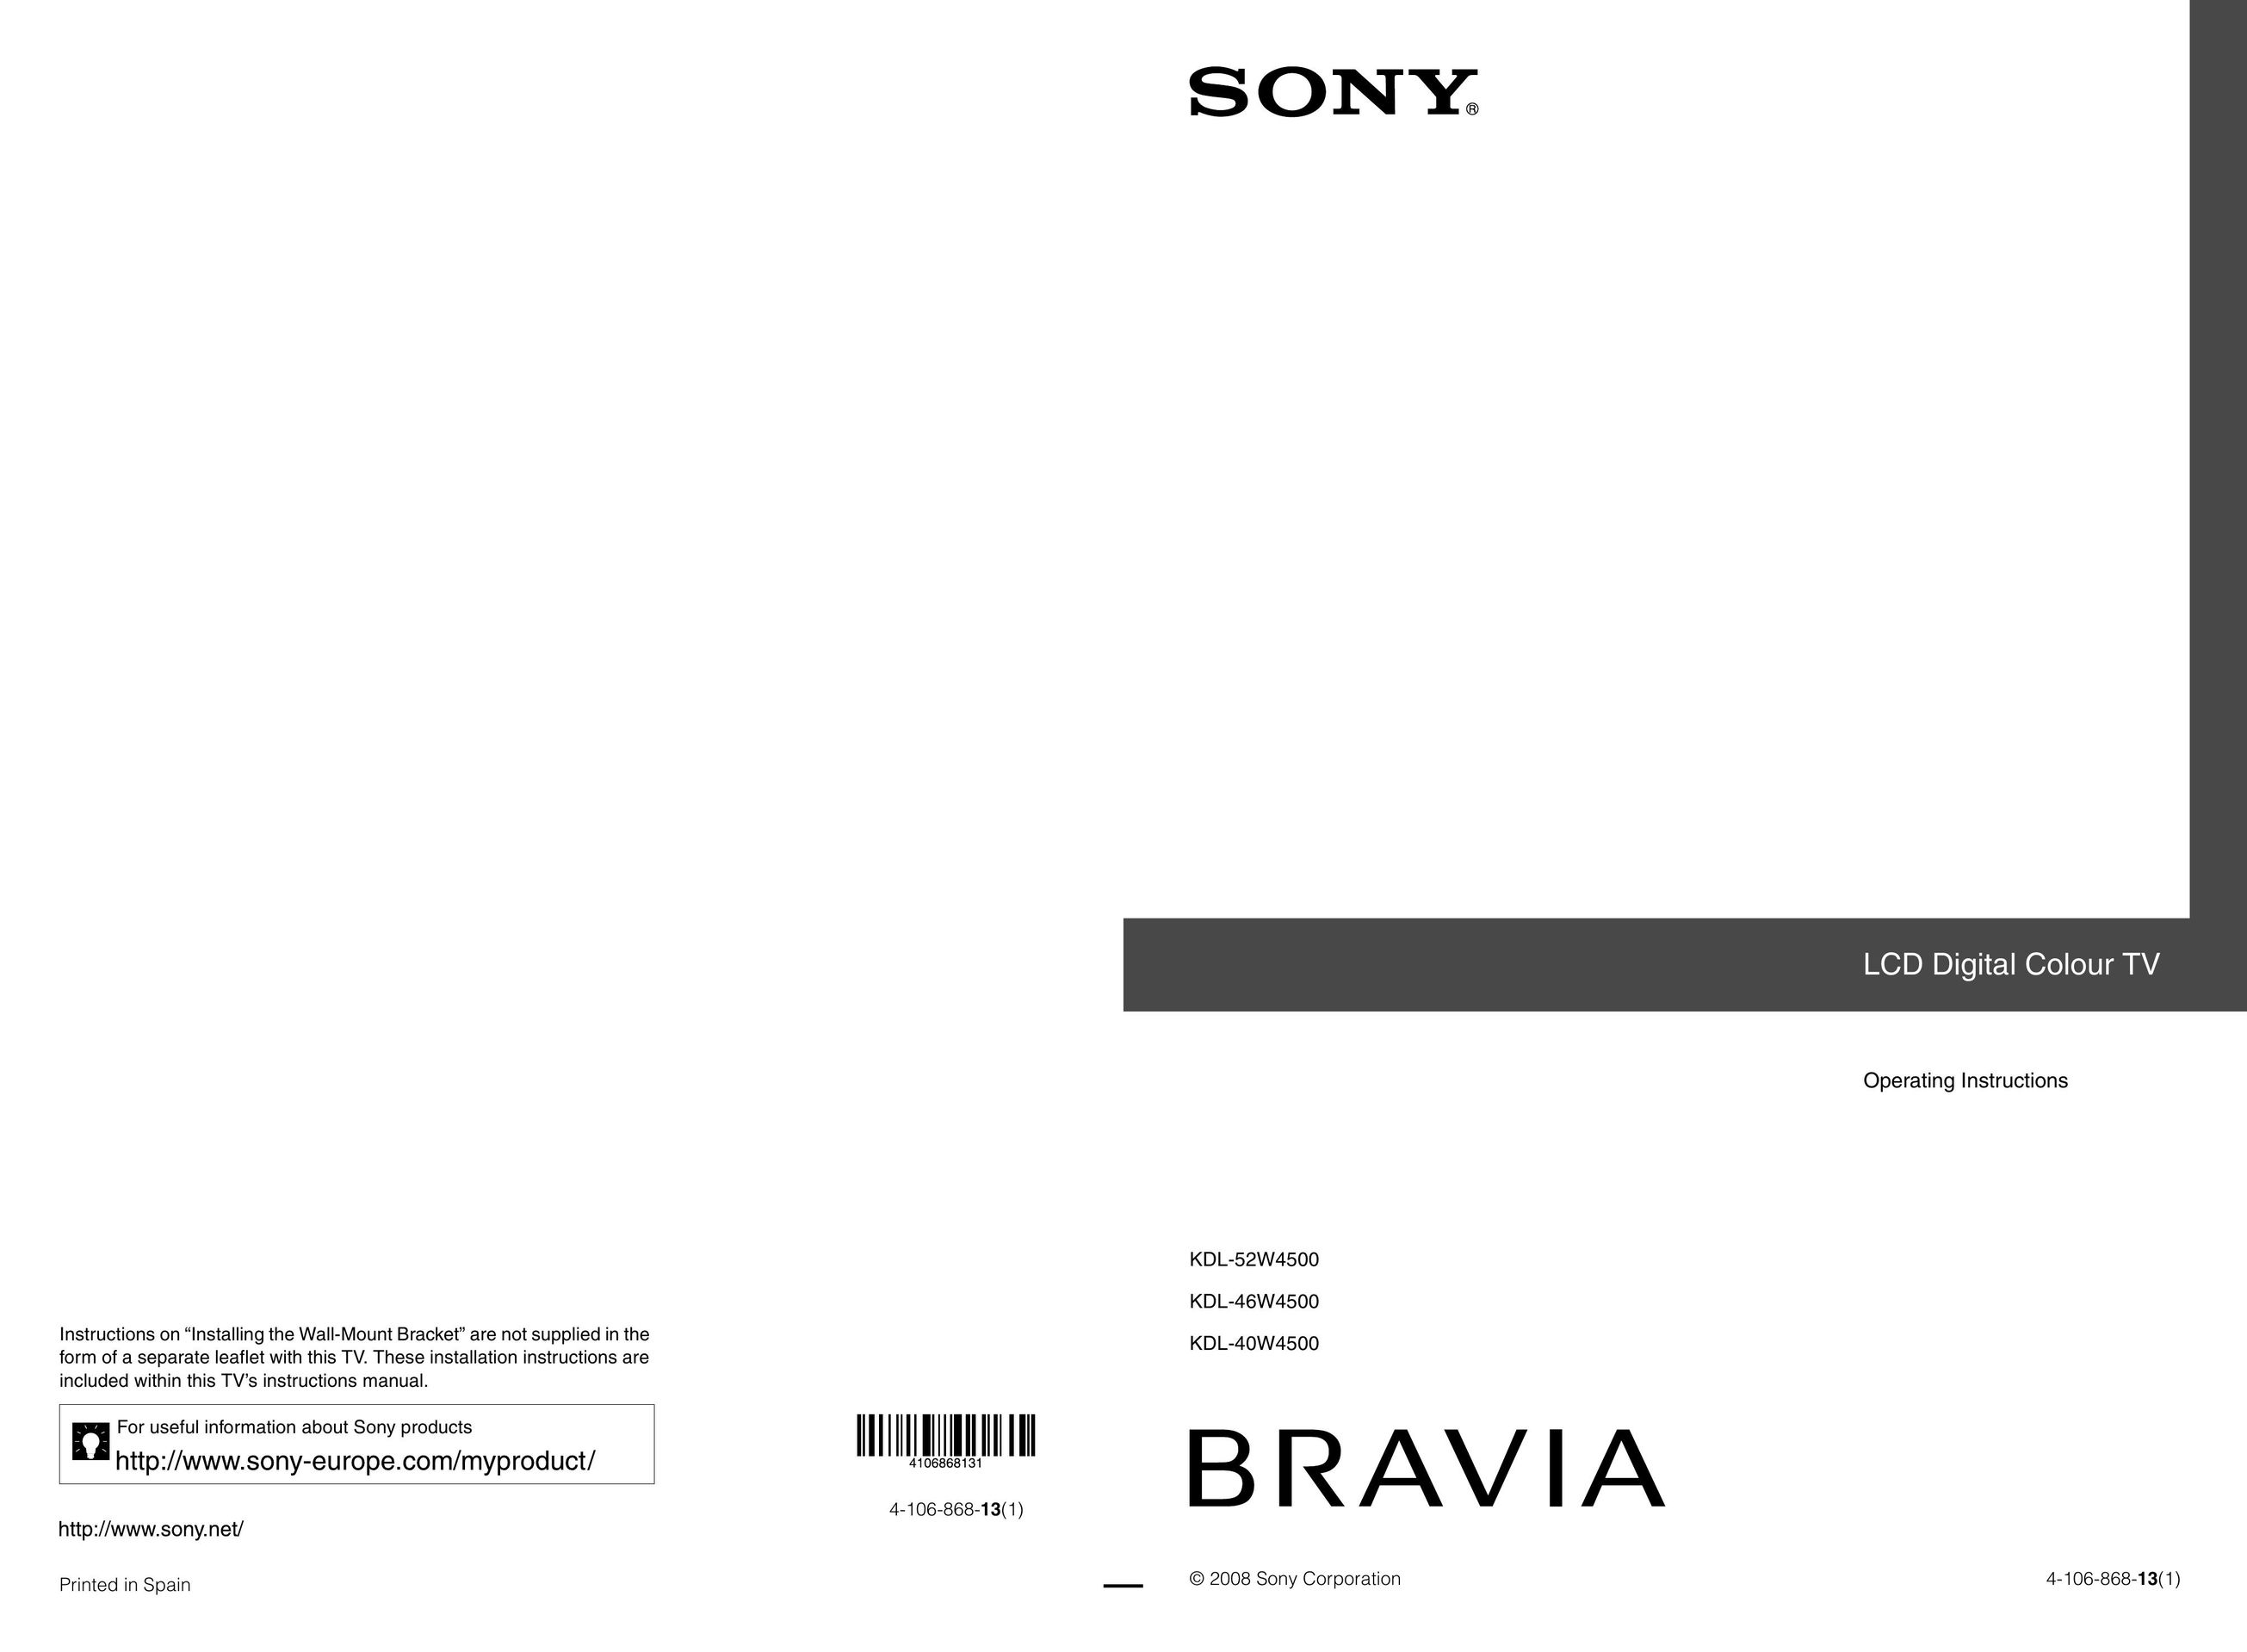 Sony 4-106-868-13(1) Flat Panel Television User Manual